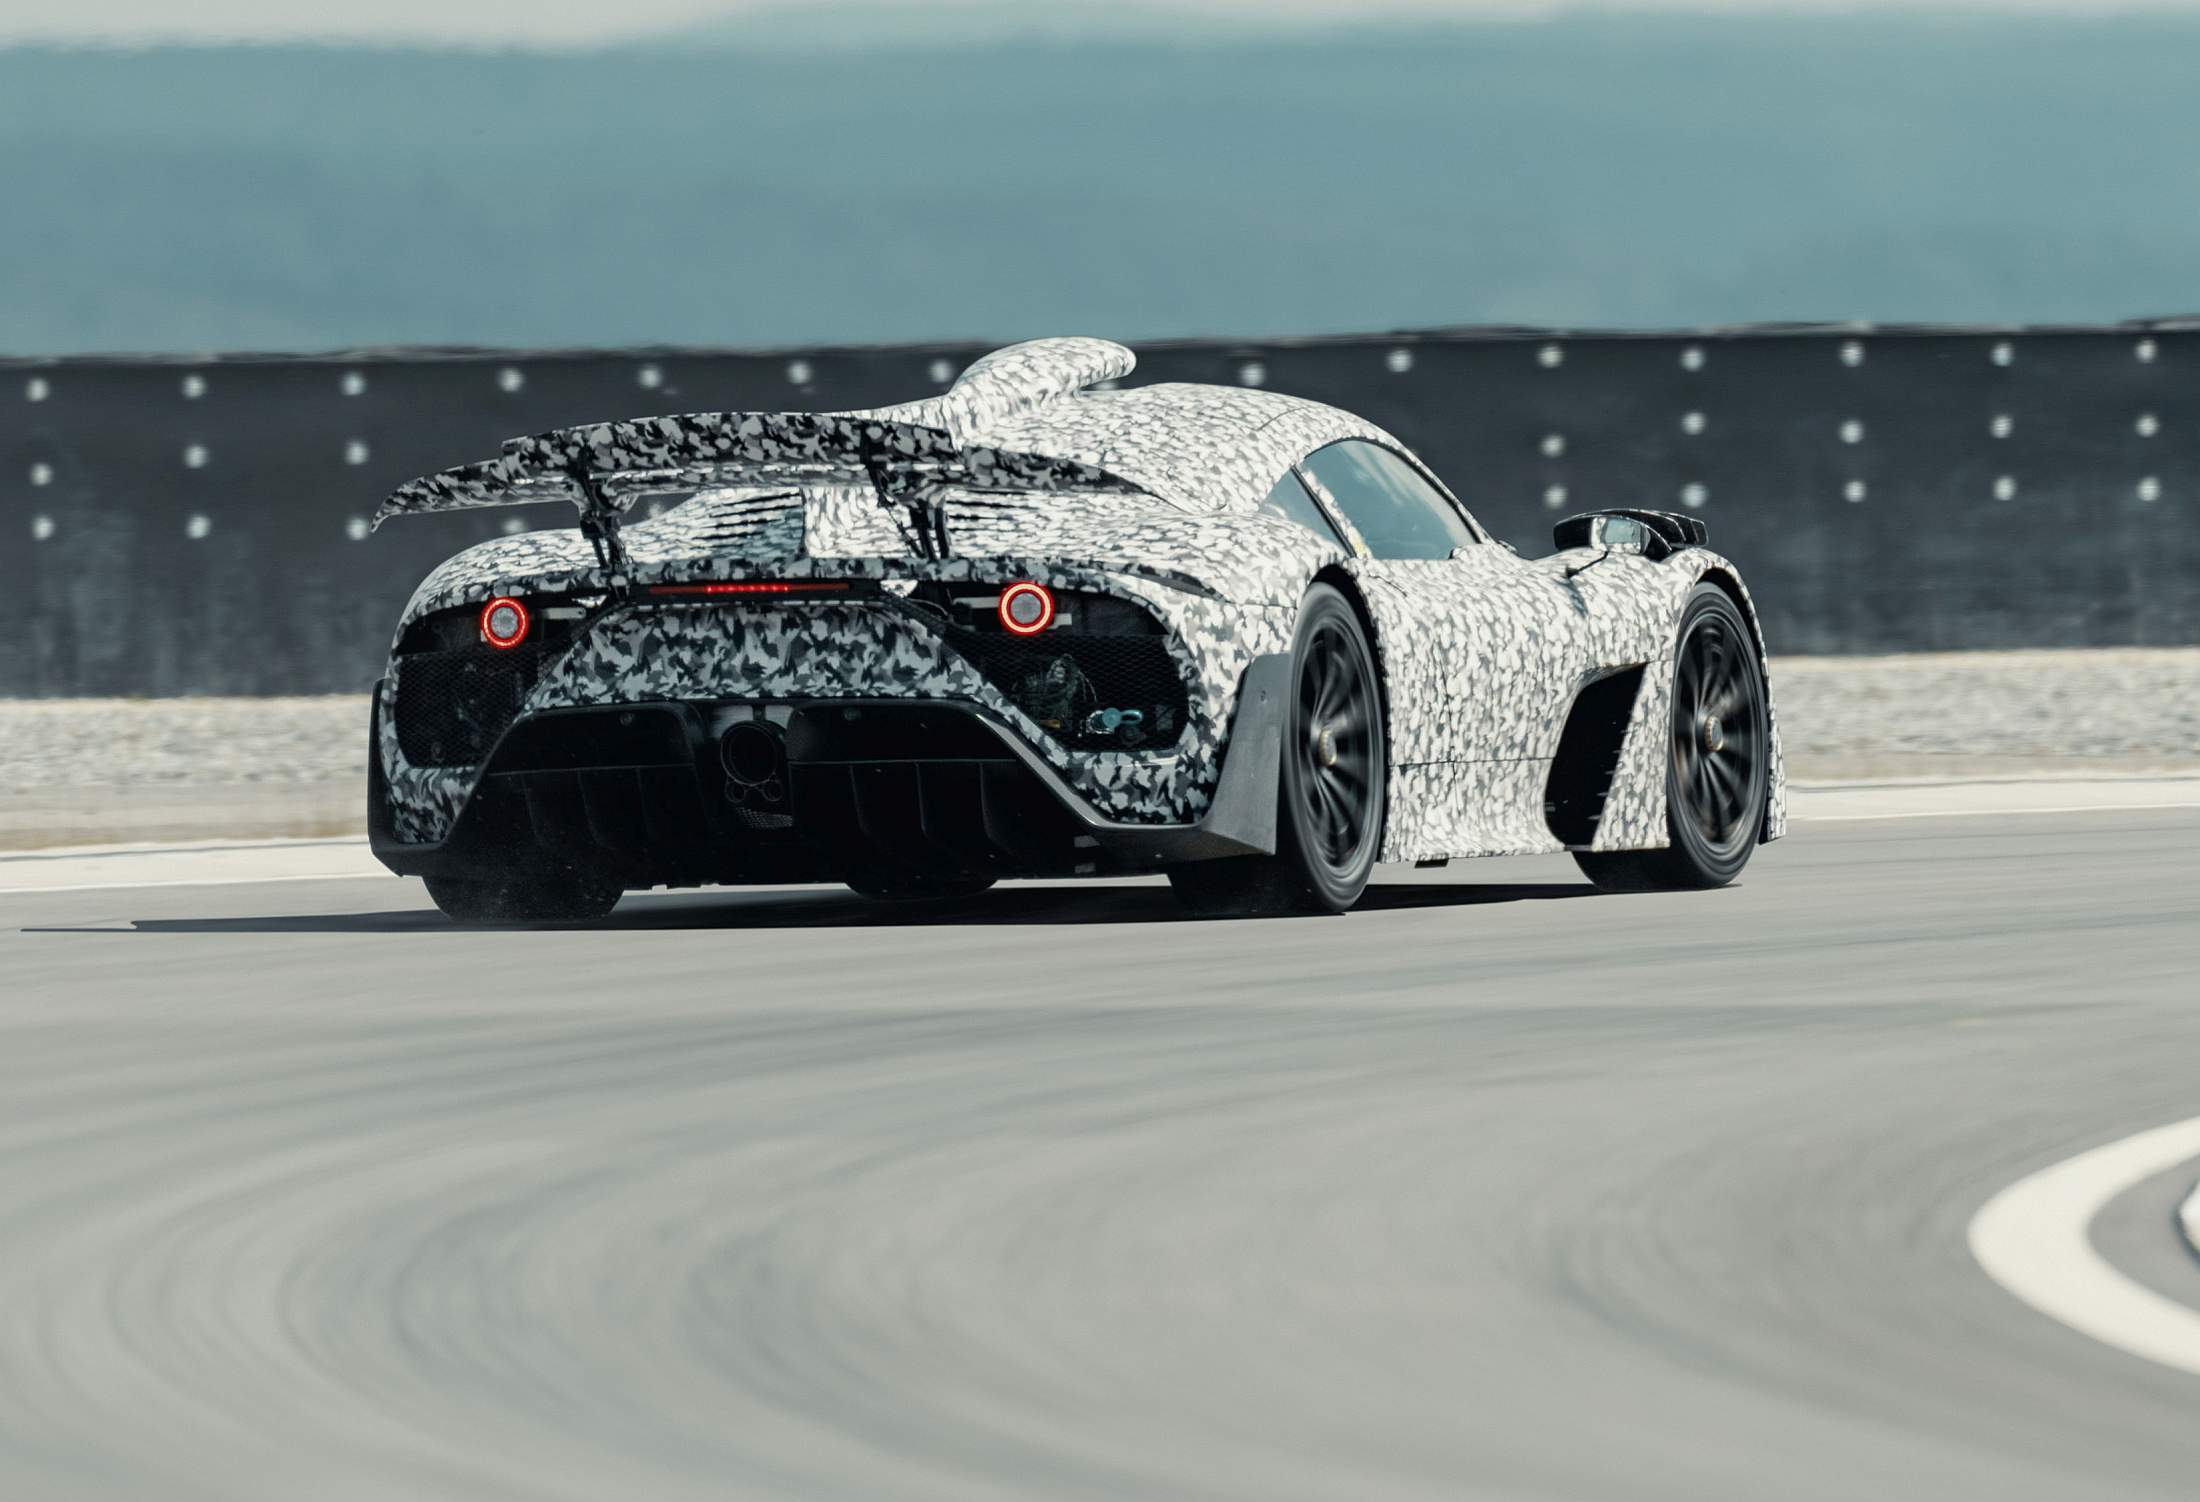 Mercedes-AMG Project ONE: Erprobung geht in eine spannende Phase

Mercedes-AMG Project ONE: testing reaches an exciting phase